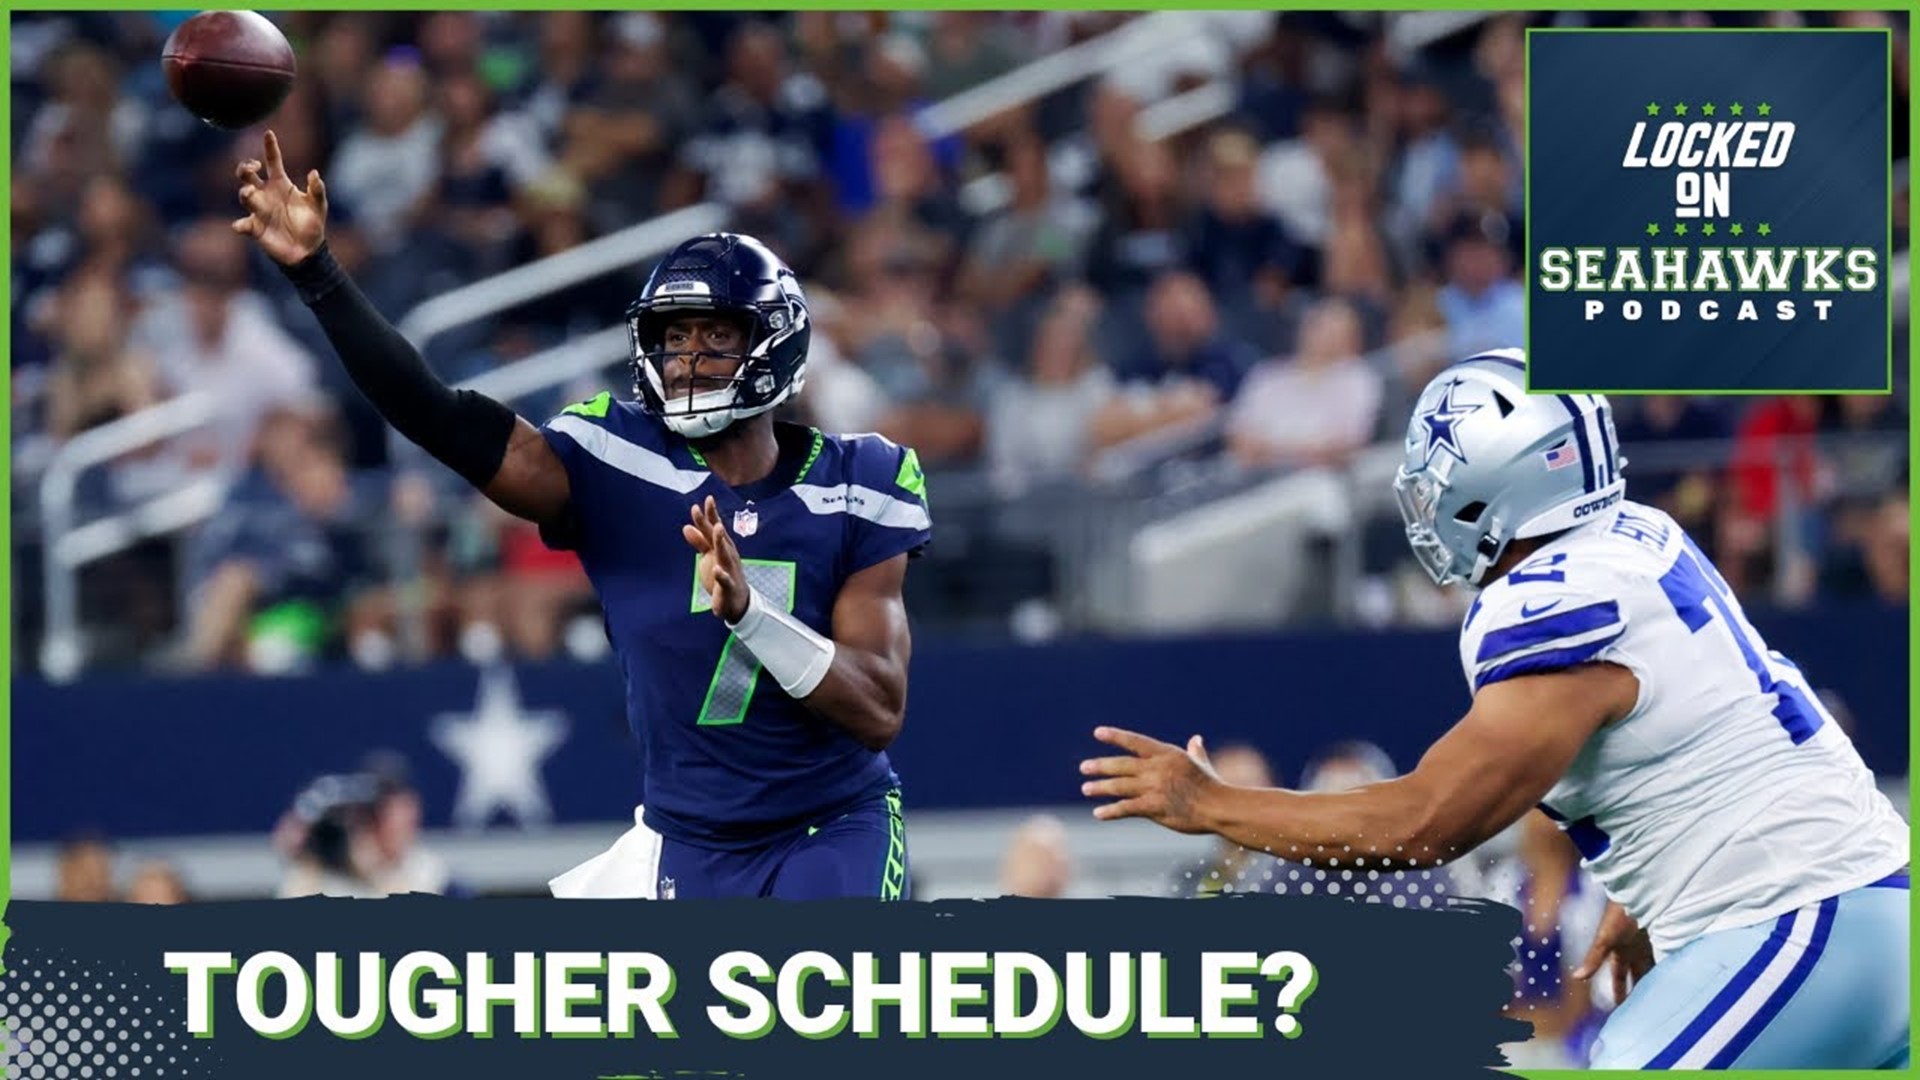 Taking advantage of a last-place schedule, the Seahawks managed to slip into the playoffs with a 9-8 record in 2022, but they may not be as fortunate next season.